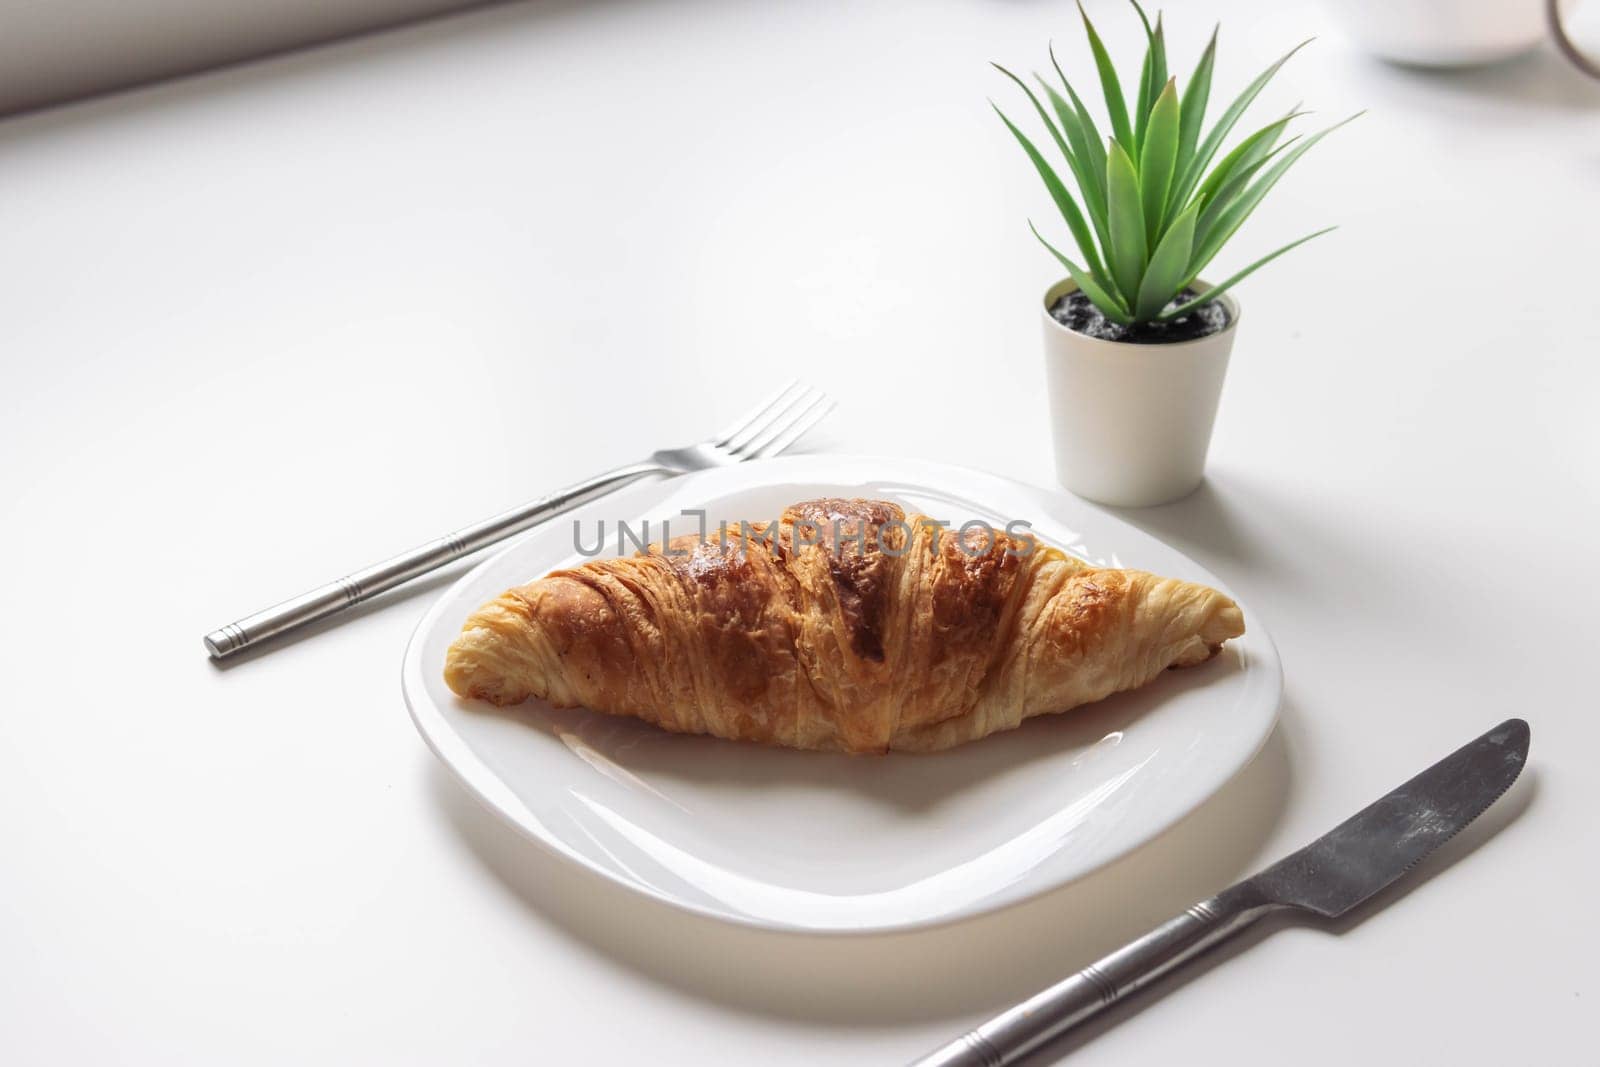 fresh french croissant on a white plate on the sides lies a fork and a knife for food angle photo from the side a green flower lies on the table by PopOff